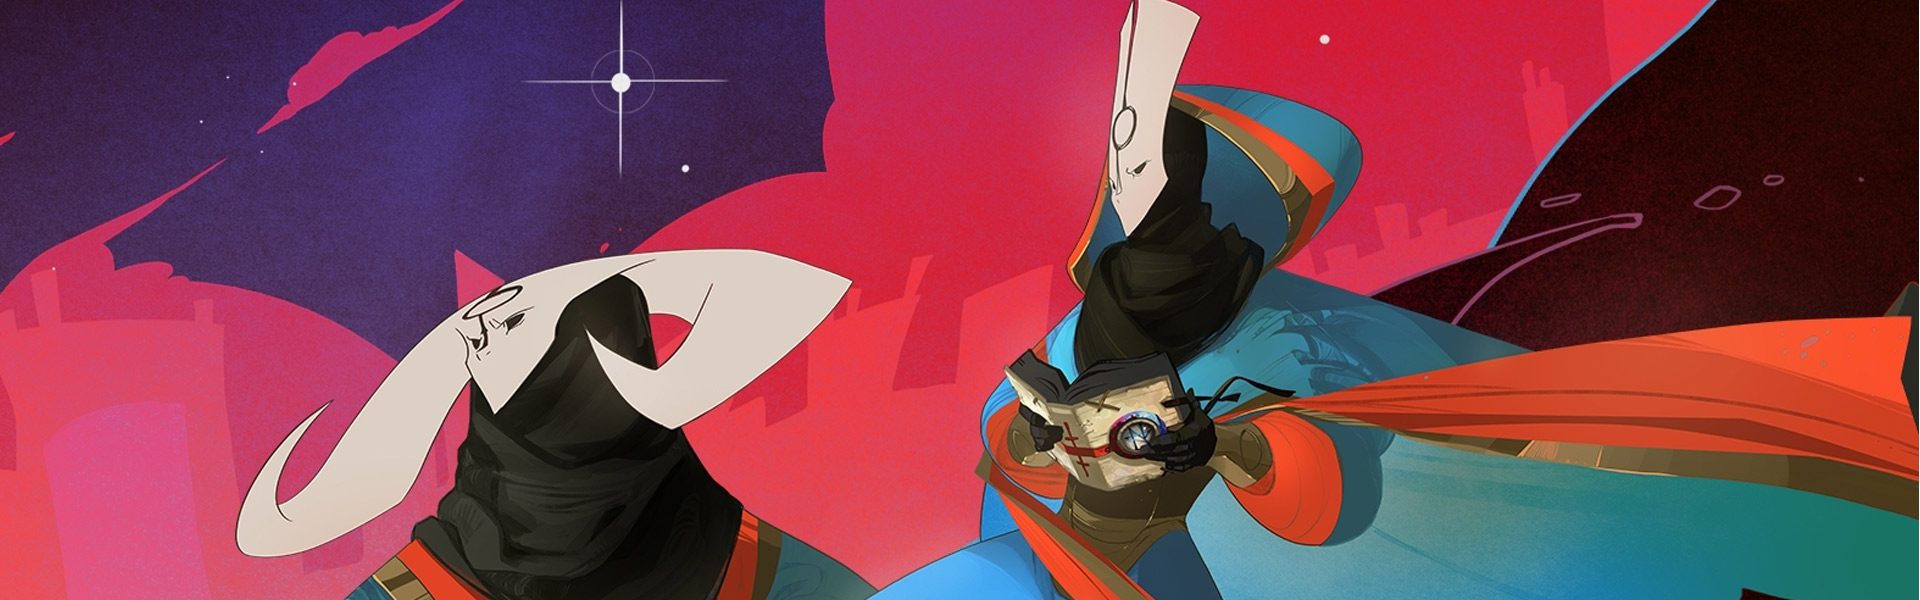 download pyre playstation